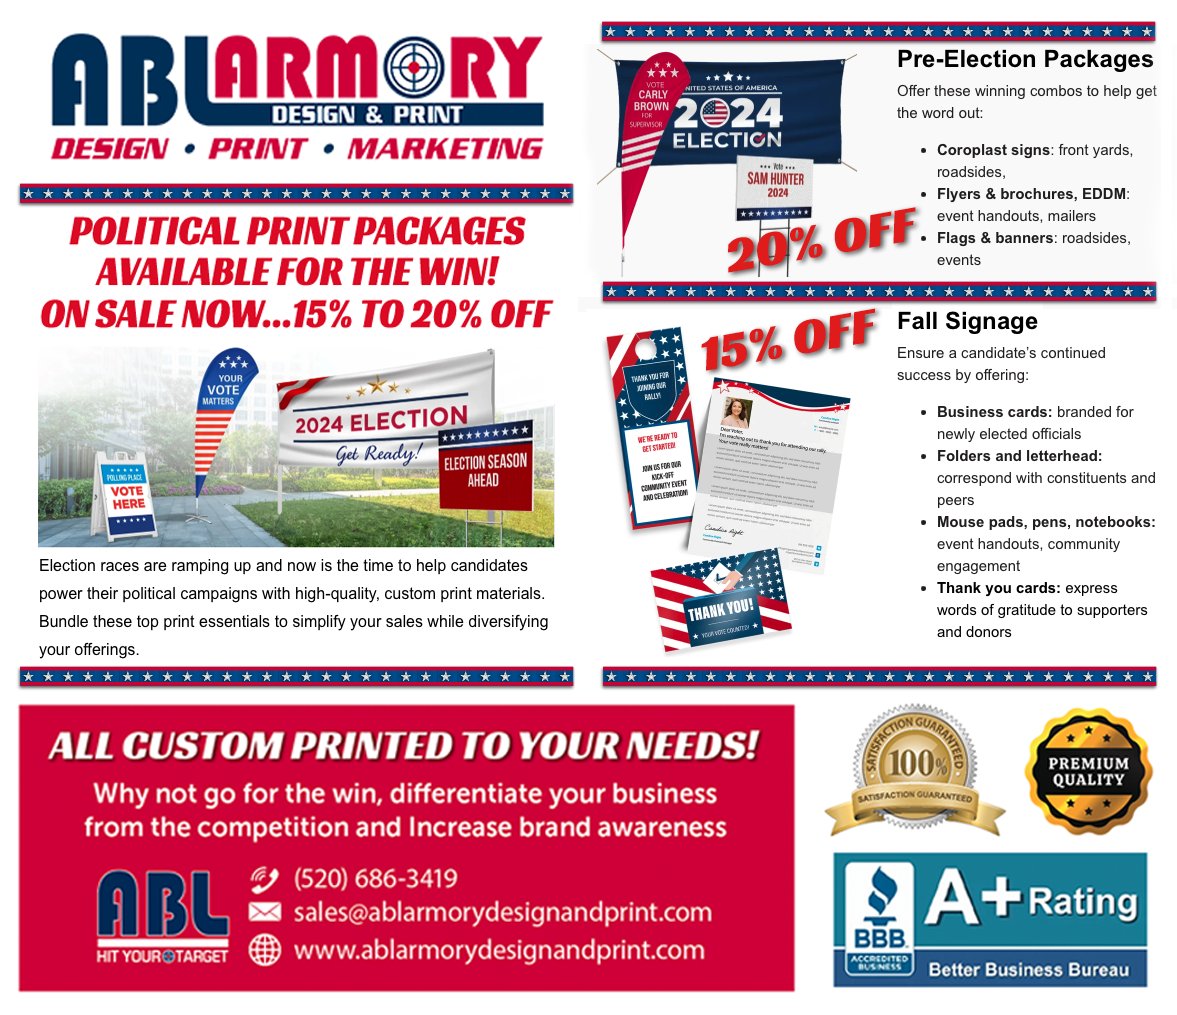 Ready to amplify your political campaign? ABL Armory Design & Print has a special offer for you! Get 15-20% off Political Graphics & Printing. Reach out today at 520-686-3419 or ablarmorydesignandprint.com. Supercharge your message to your voters!  #PoliticalGraphics #PrintingSale